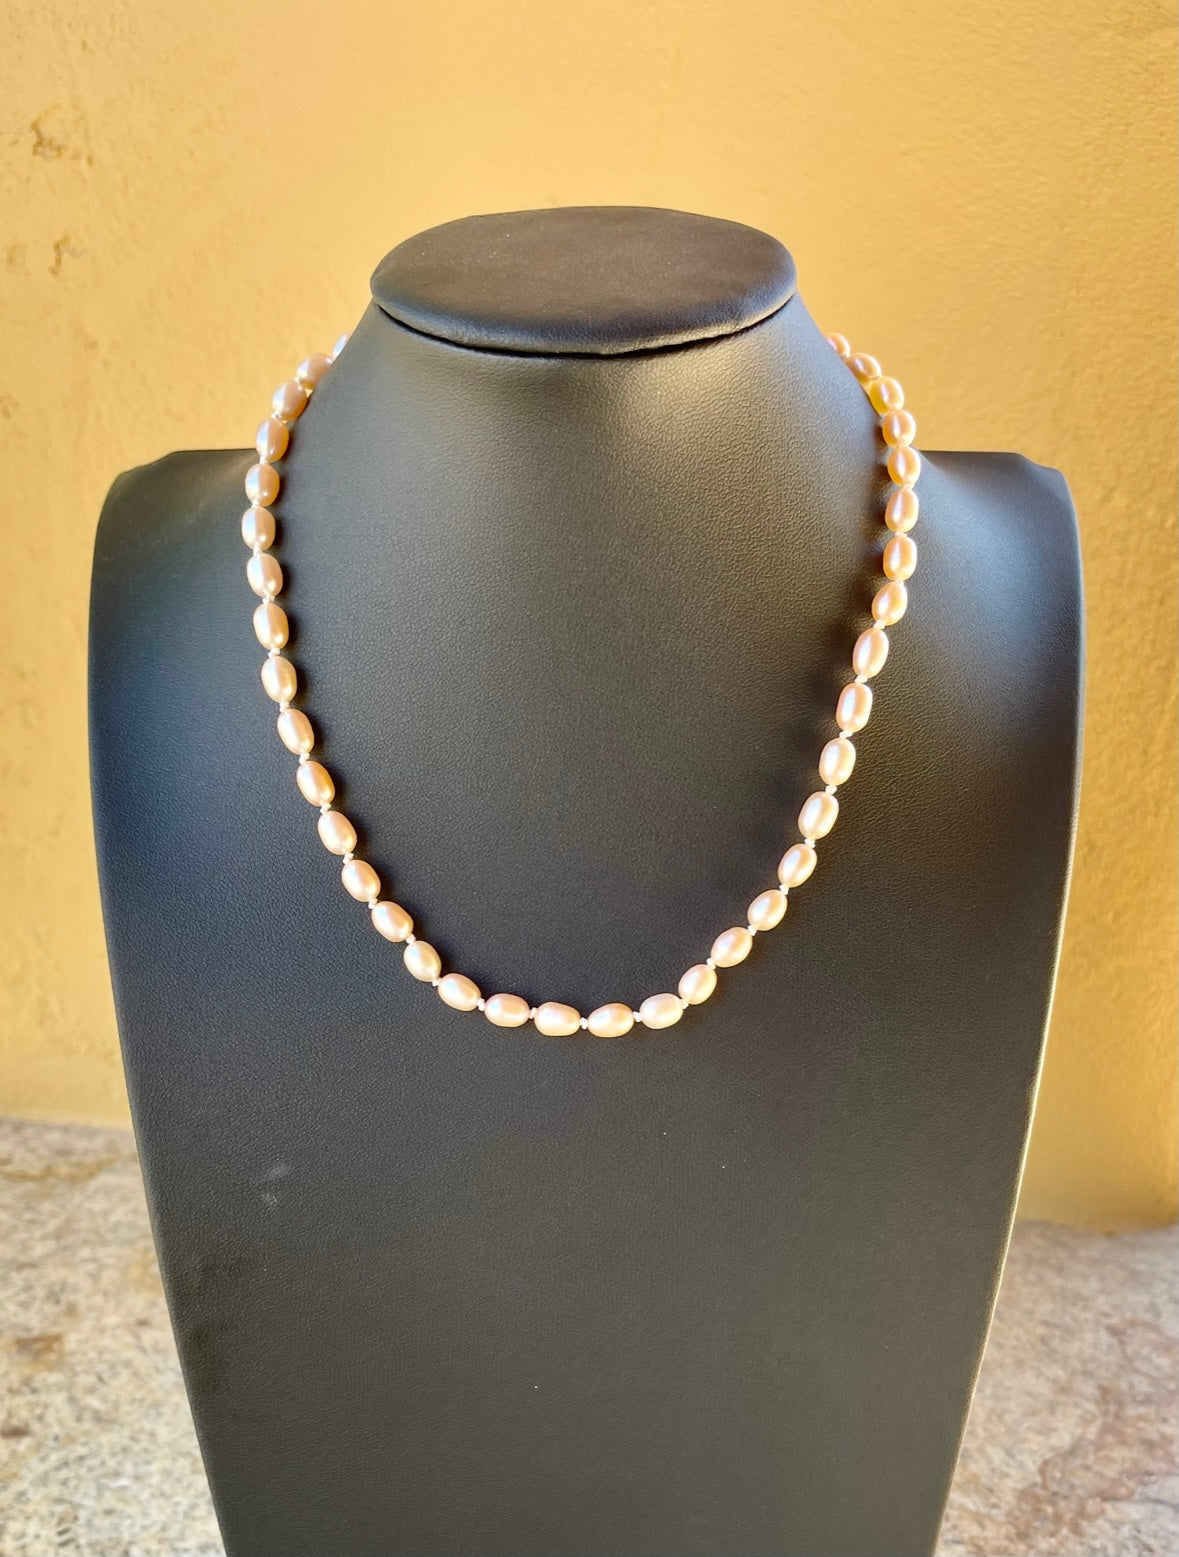 Necklace - knotted coral rice pearls with a sterling silver clap